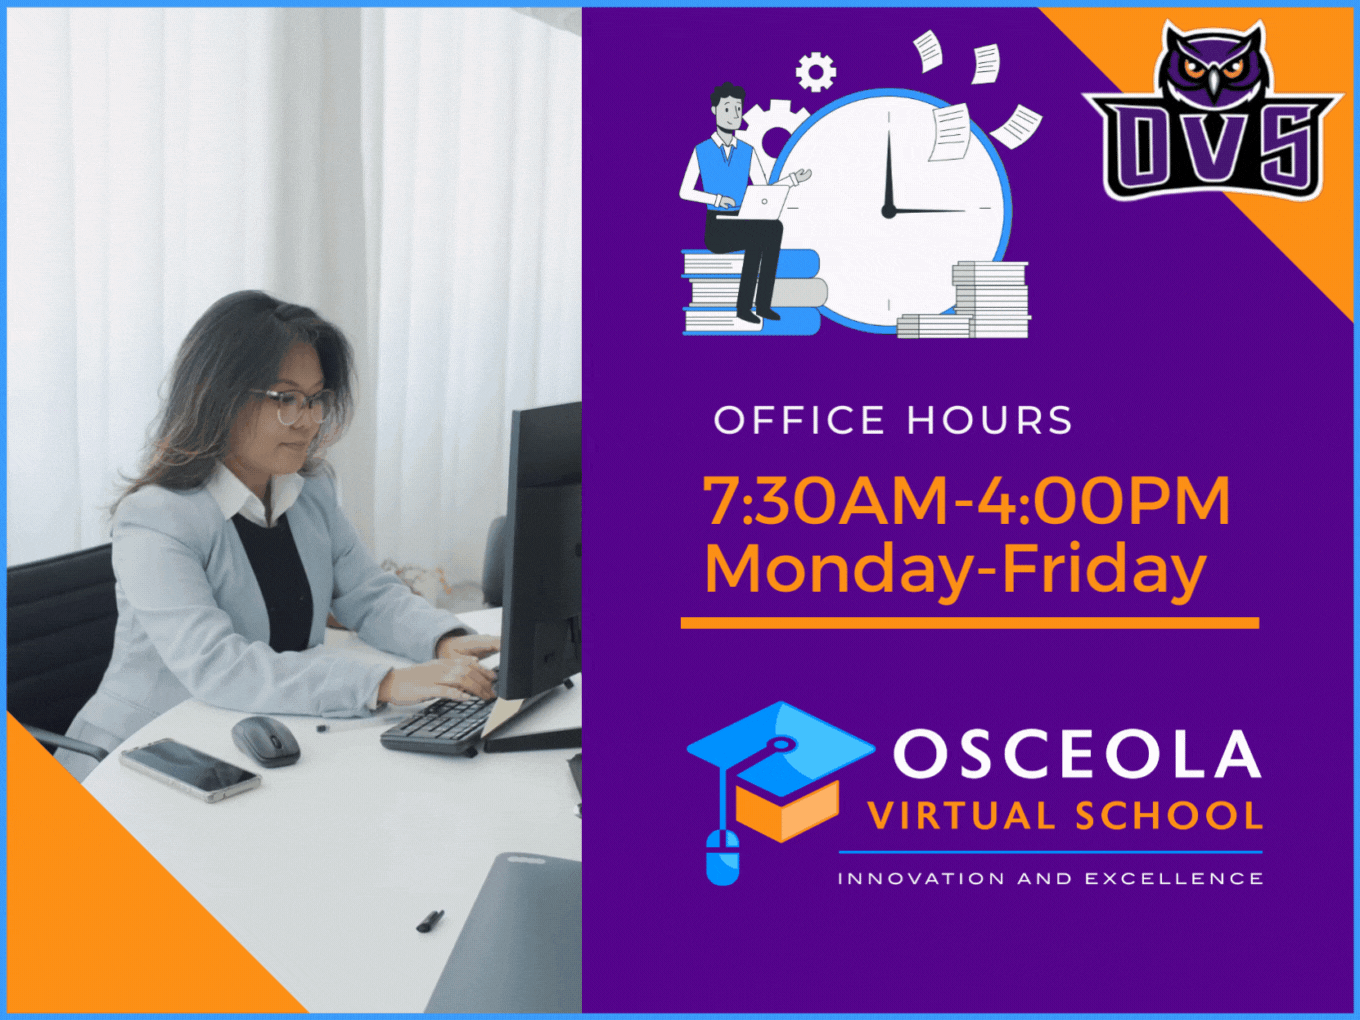 OVS Summer office hours. Monday through Wednesday, 7:00 AM through 5:00 PM. Thursday, 7:00 AM through 4:30 PM. Friday, Closed